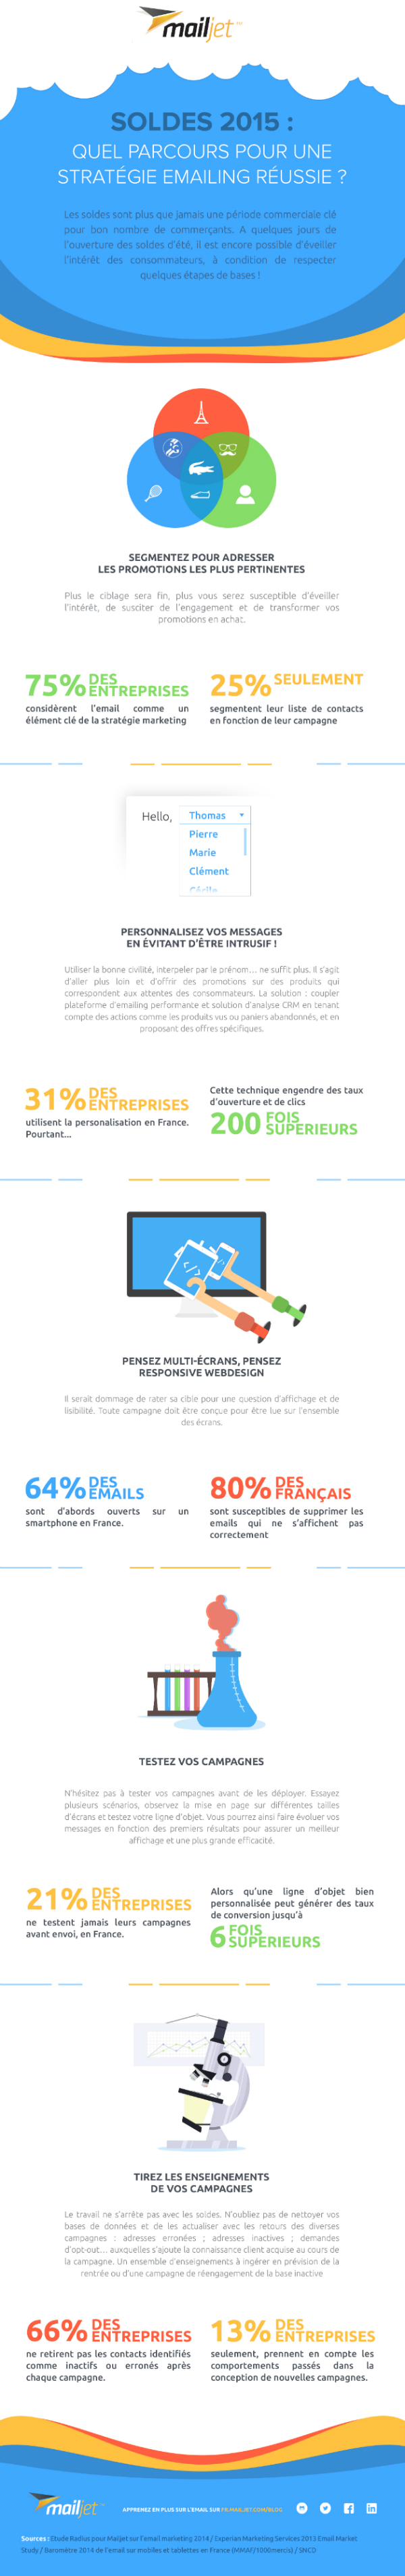 solodes_ete_2015_infographie